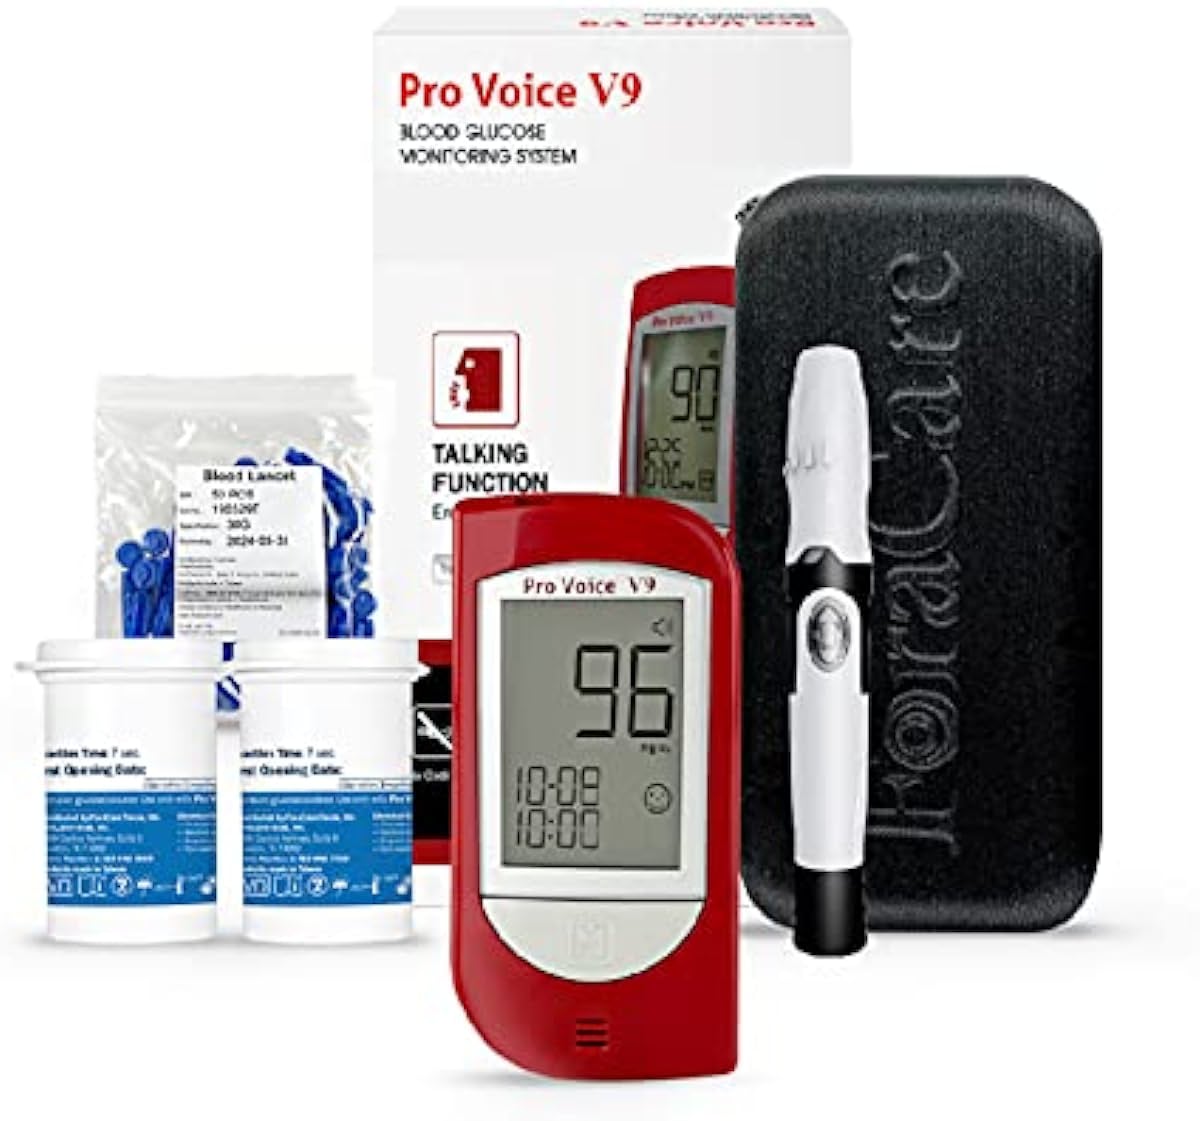 FORA Pro Voice V9 Diabetes Testing Kit for Accurate and Easy Monitoring Your Blood Glucose with Talking Glucometer, 1 Meter, 100 Test Strips, 100 Lancets, 1 Painless Design Lancing Device, Carry Case